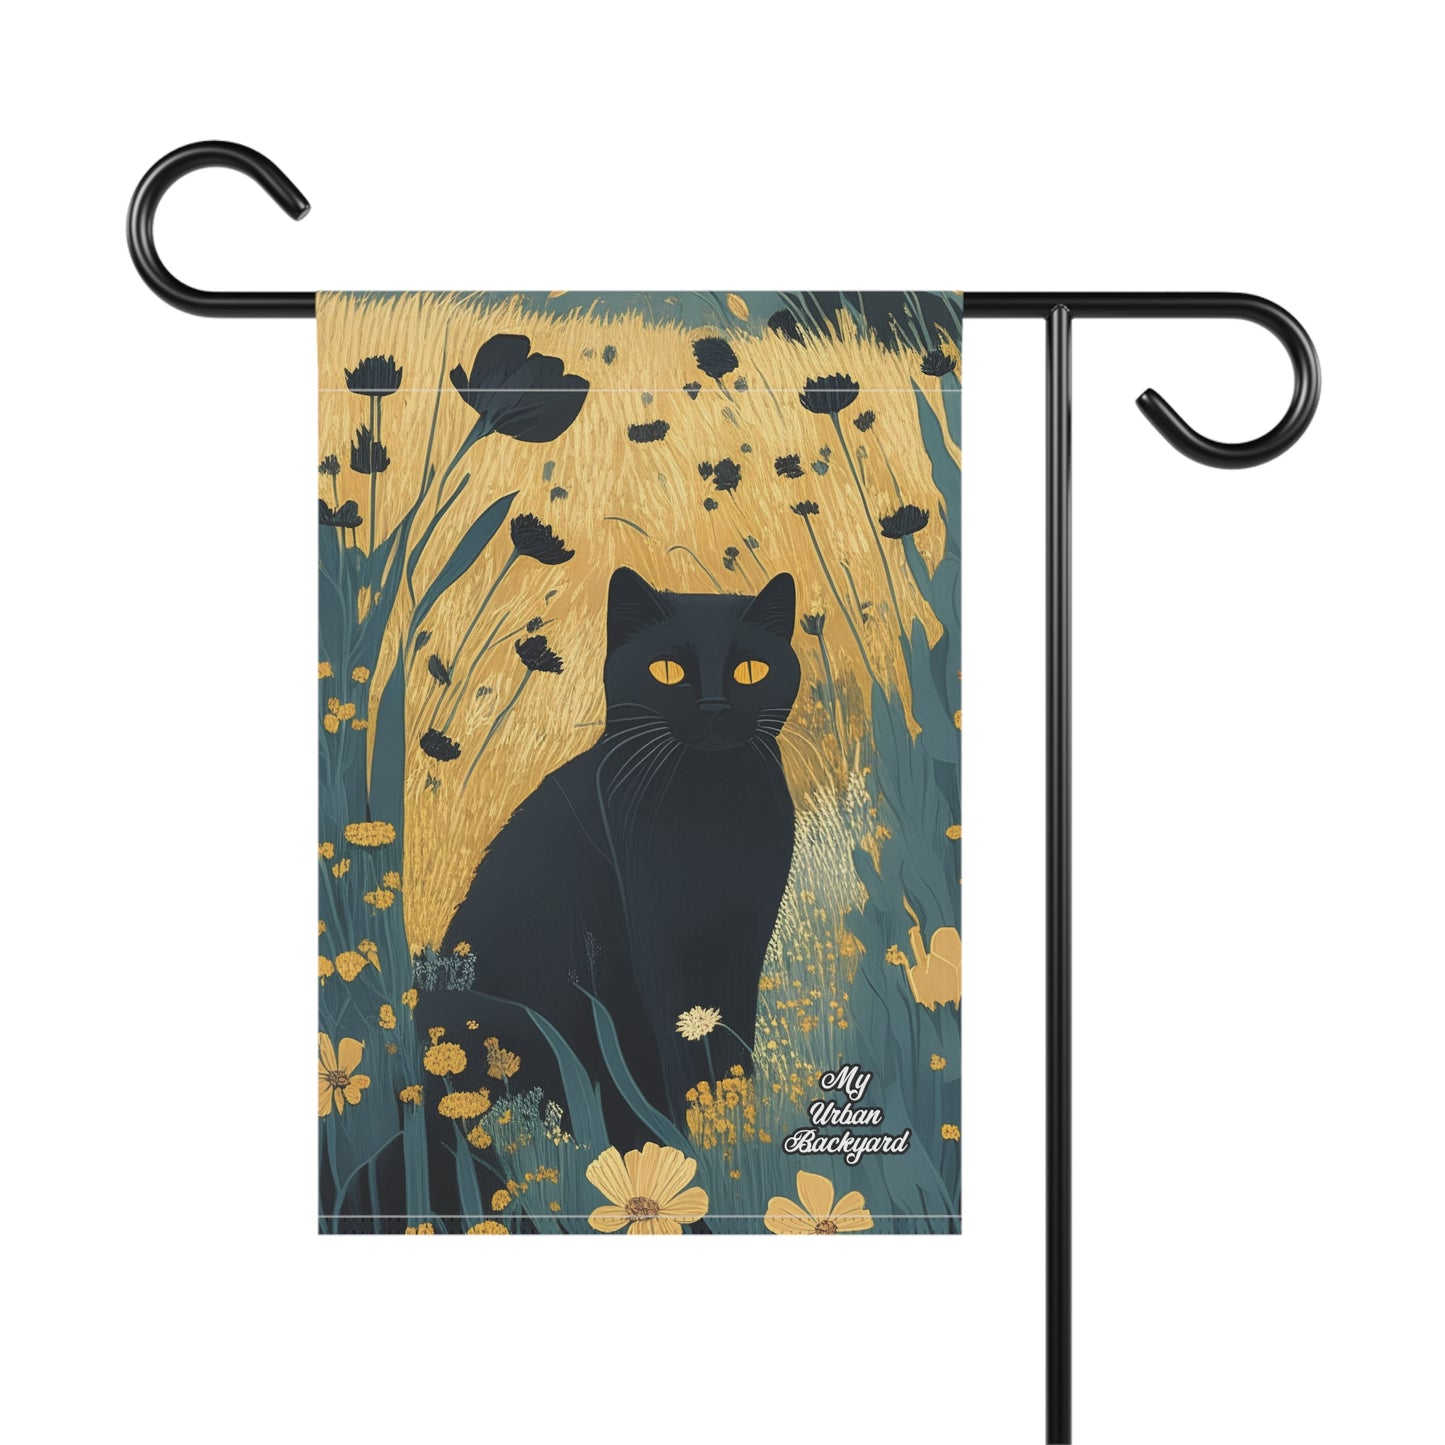 Black Cat with Black Flowers, Garden Flag for Yard, Patio, Porch, or Work, 12"x18" - Flag only